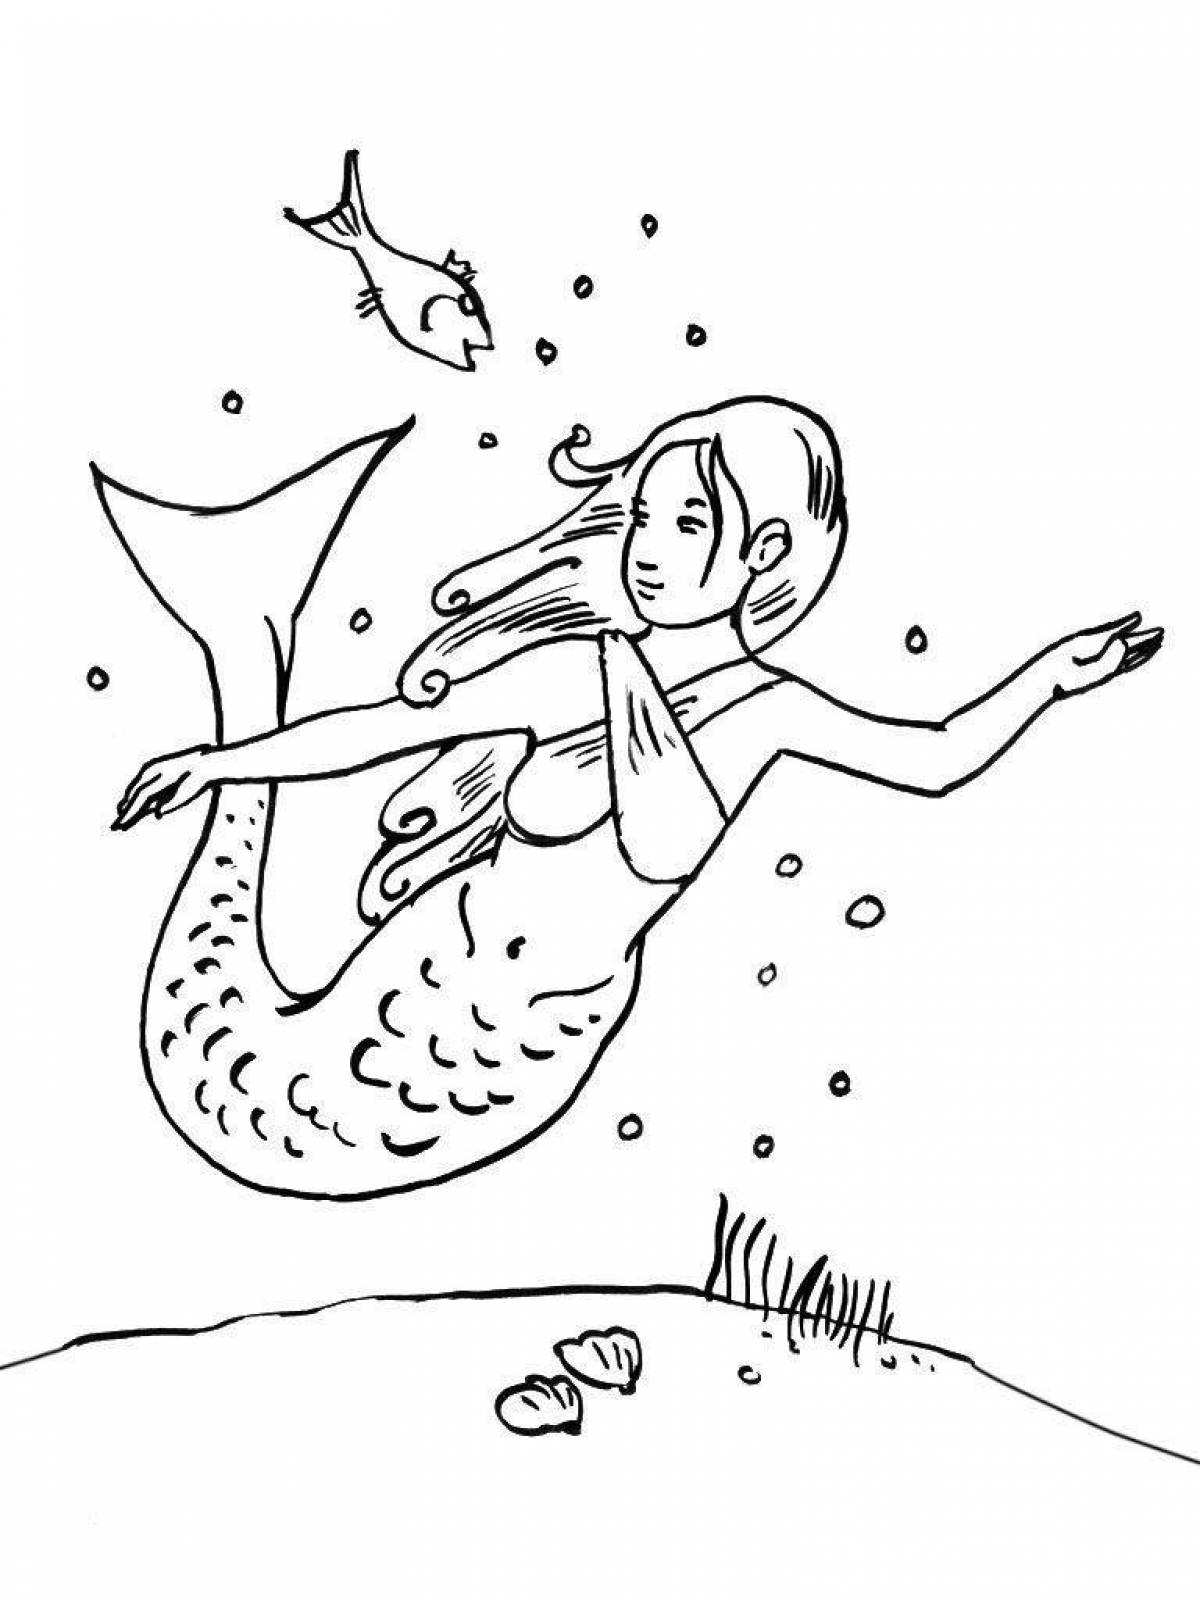 Great siren head coloring page